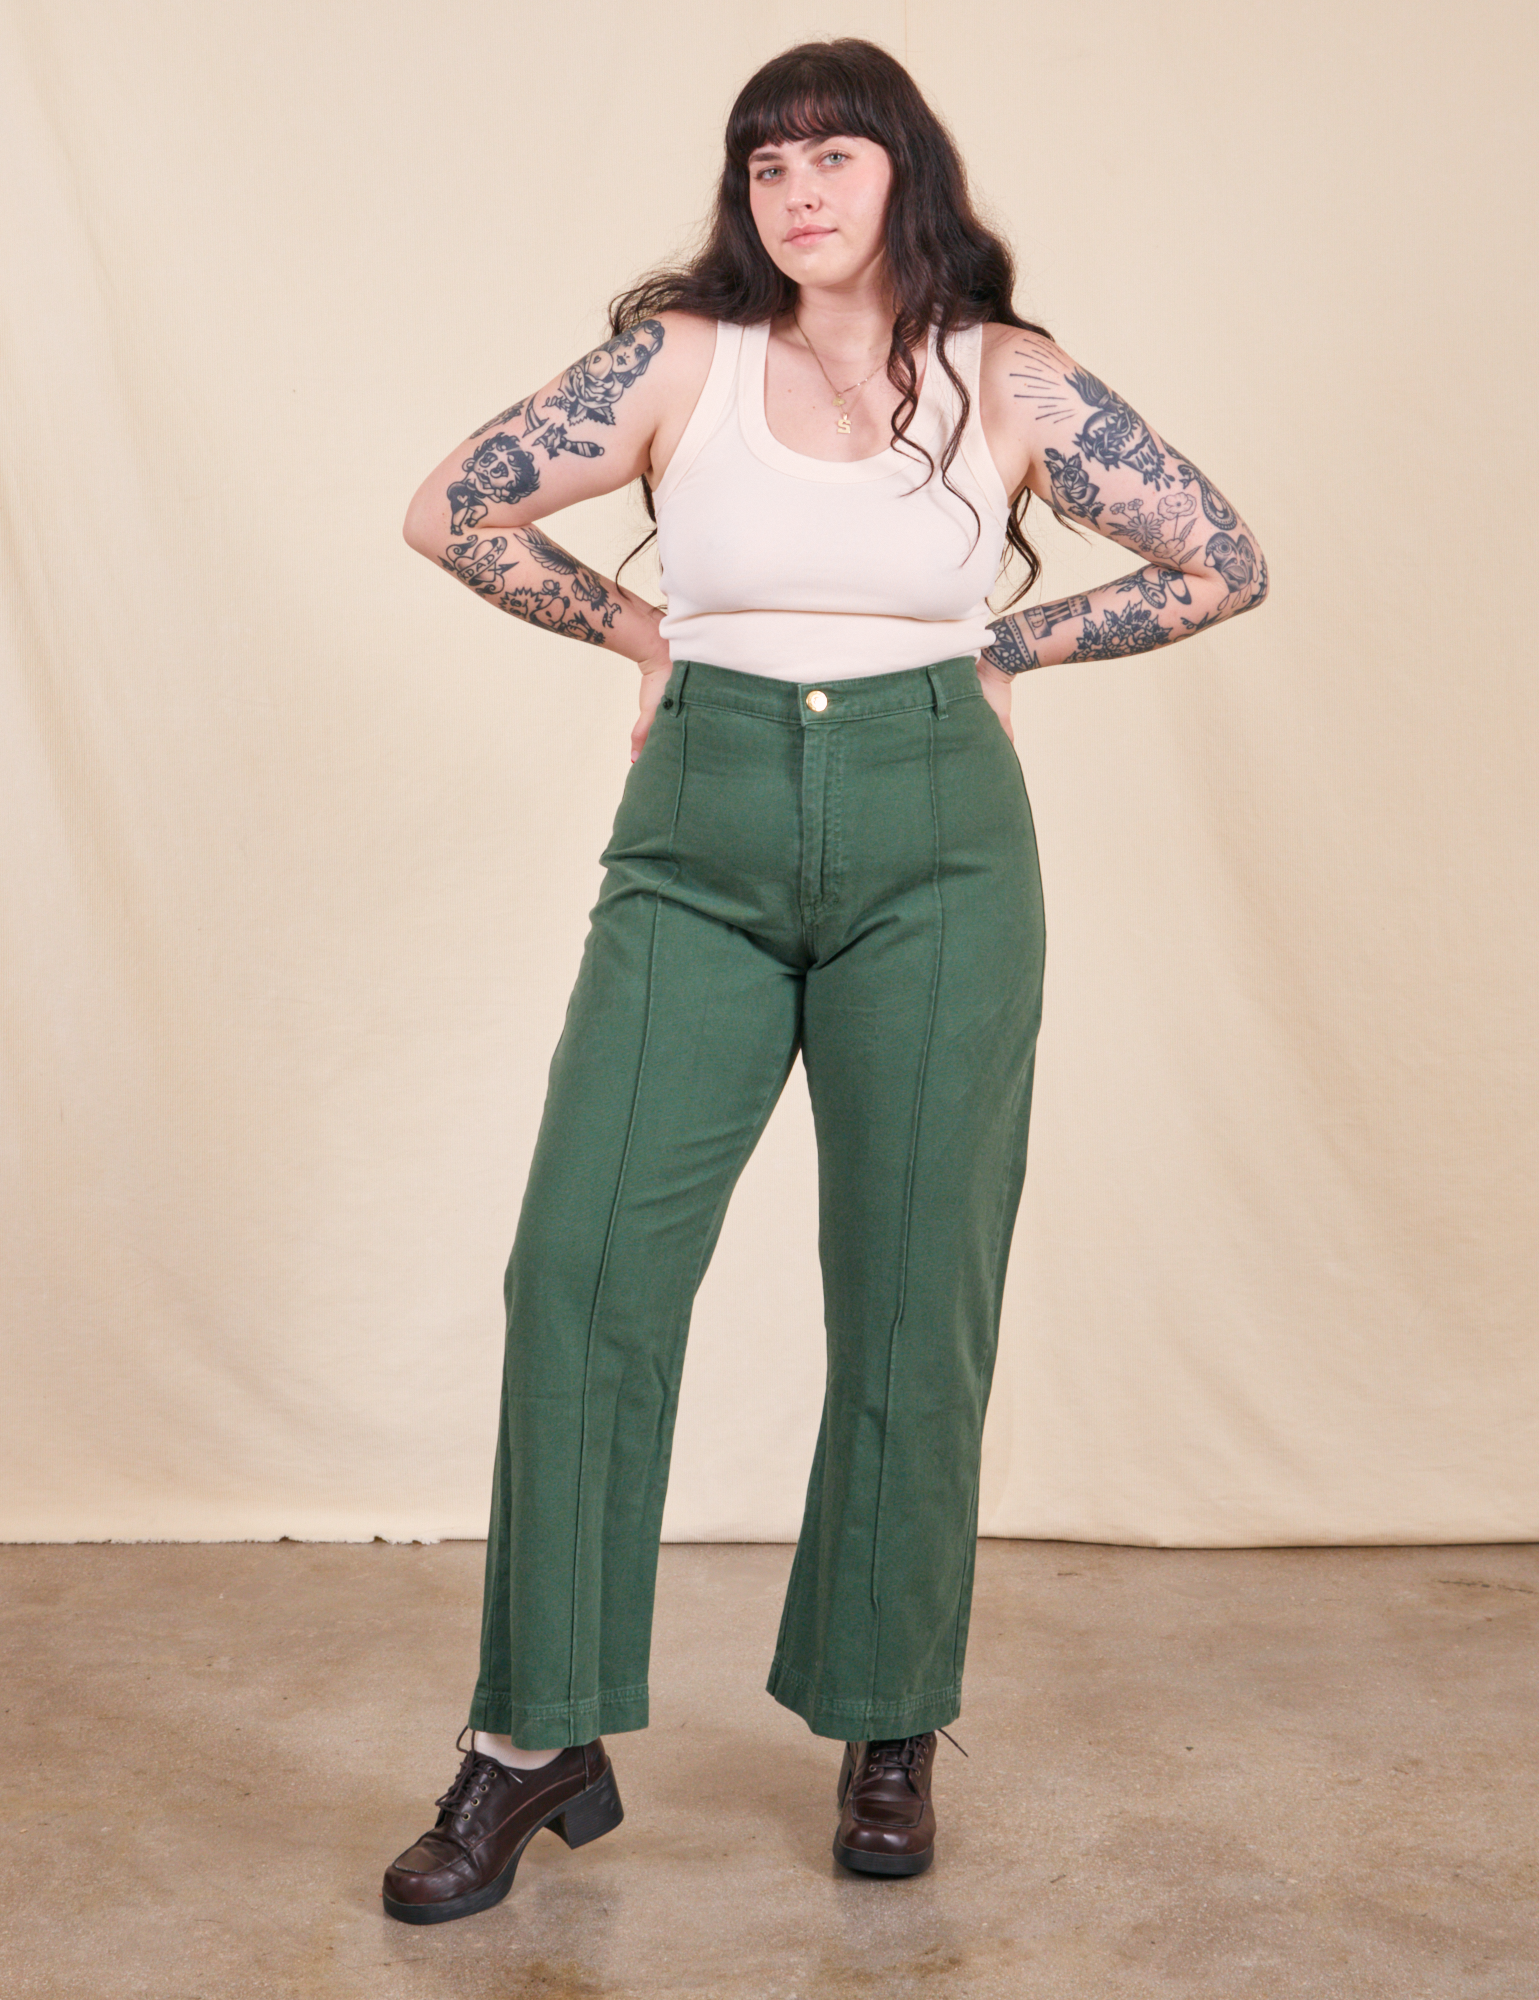 Sydney is 5&#39;9&quot; and wearing M Western Pants in Dark Emerald Green paired with vintage off-white Tank Top